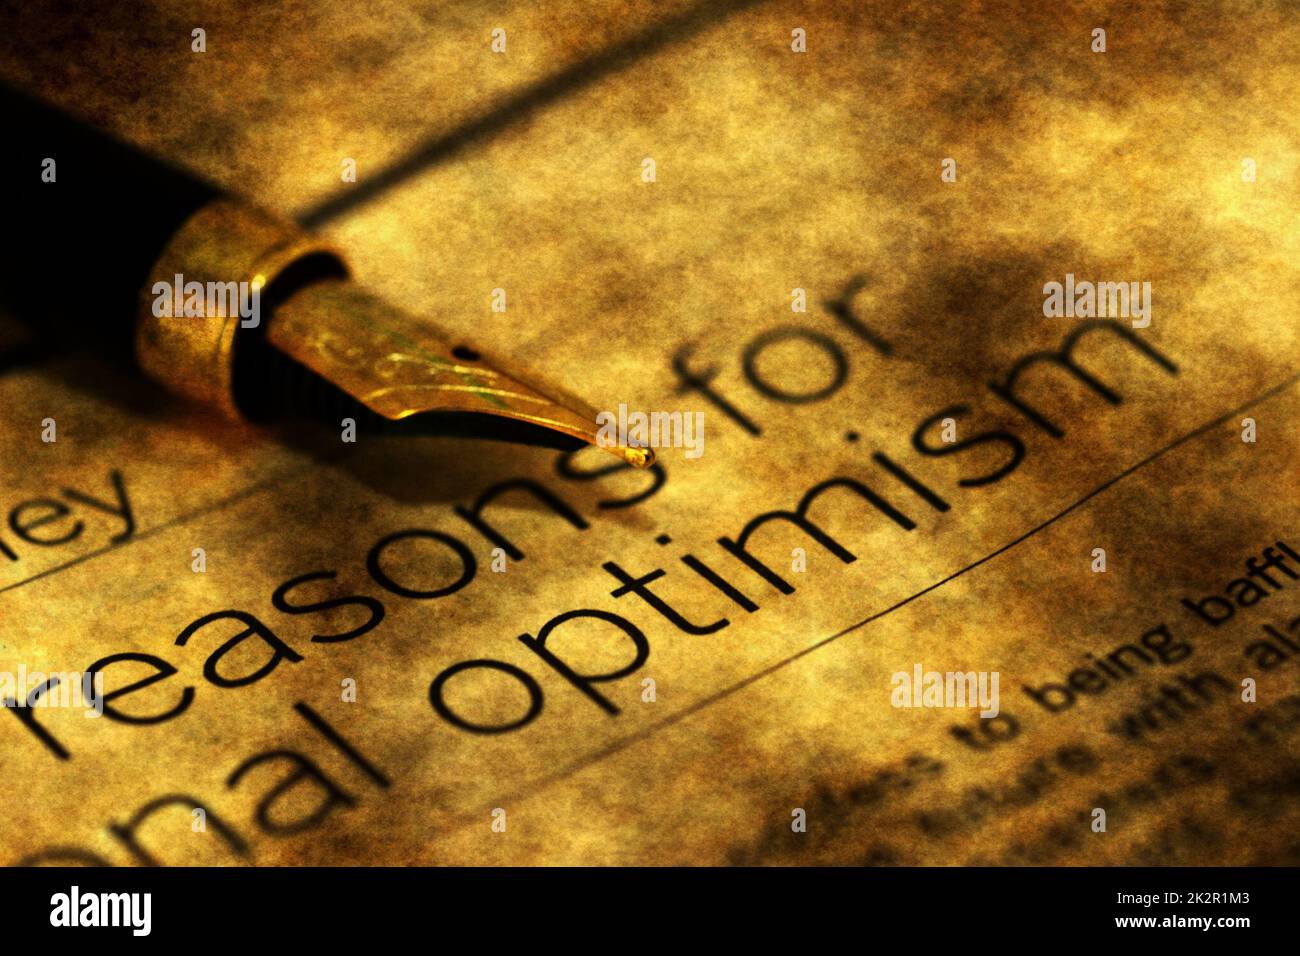 Reasons for optimism Stock Photo